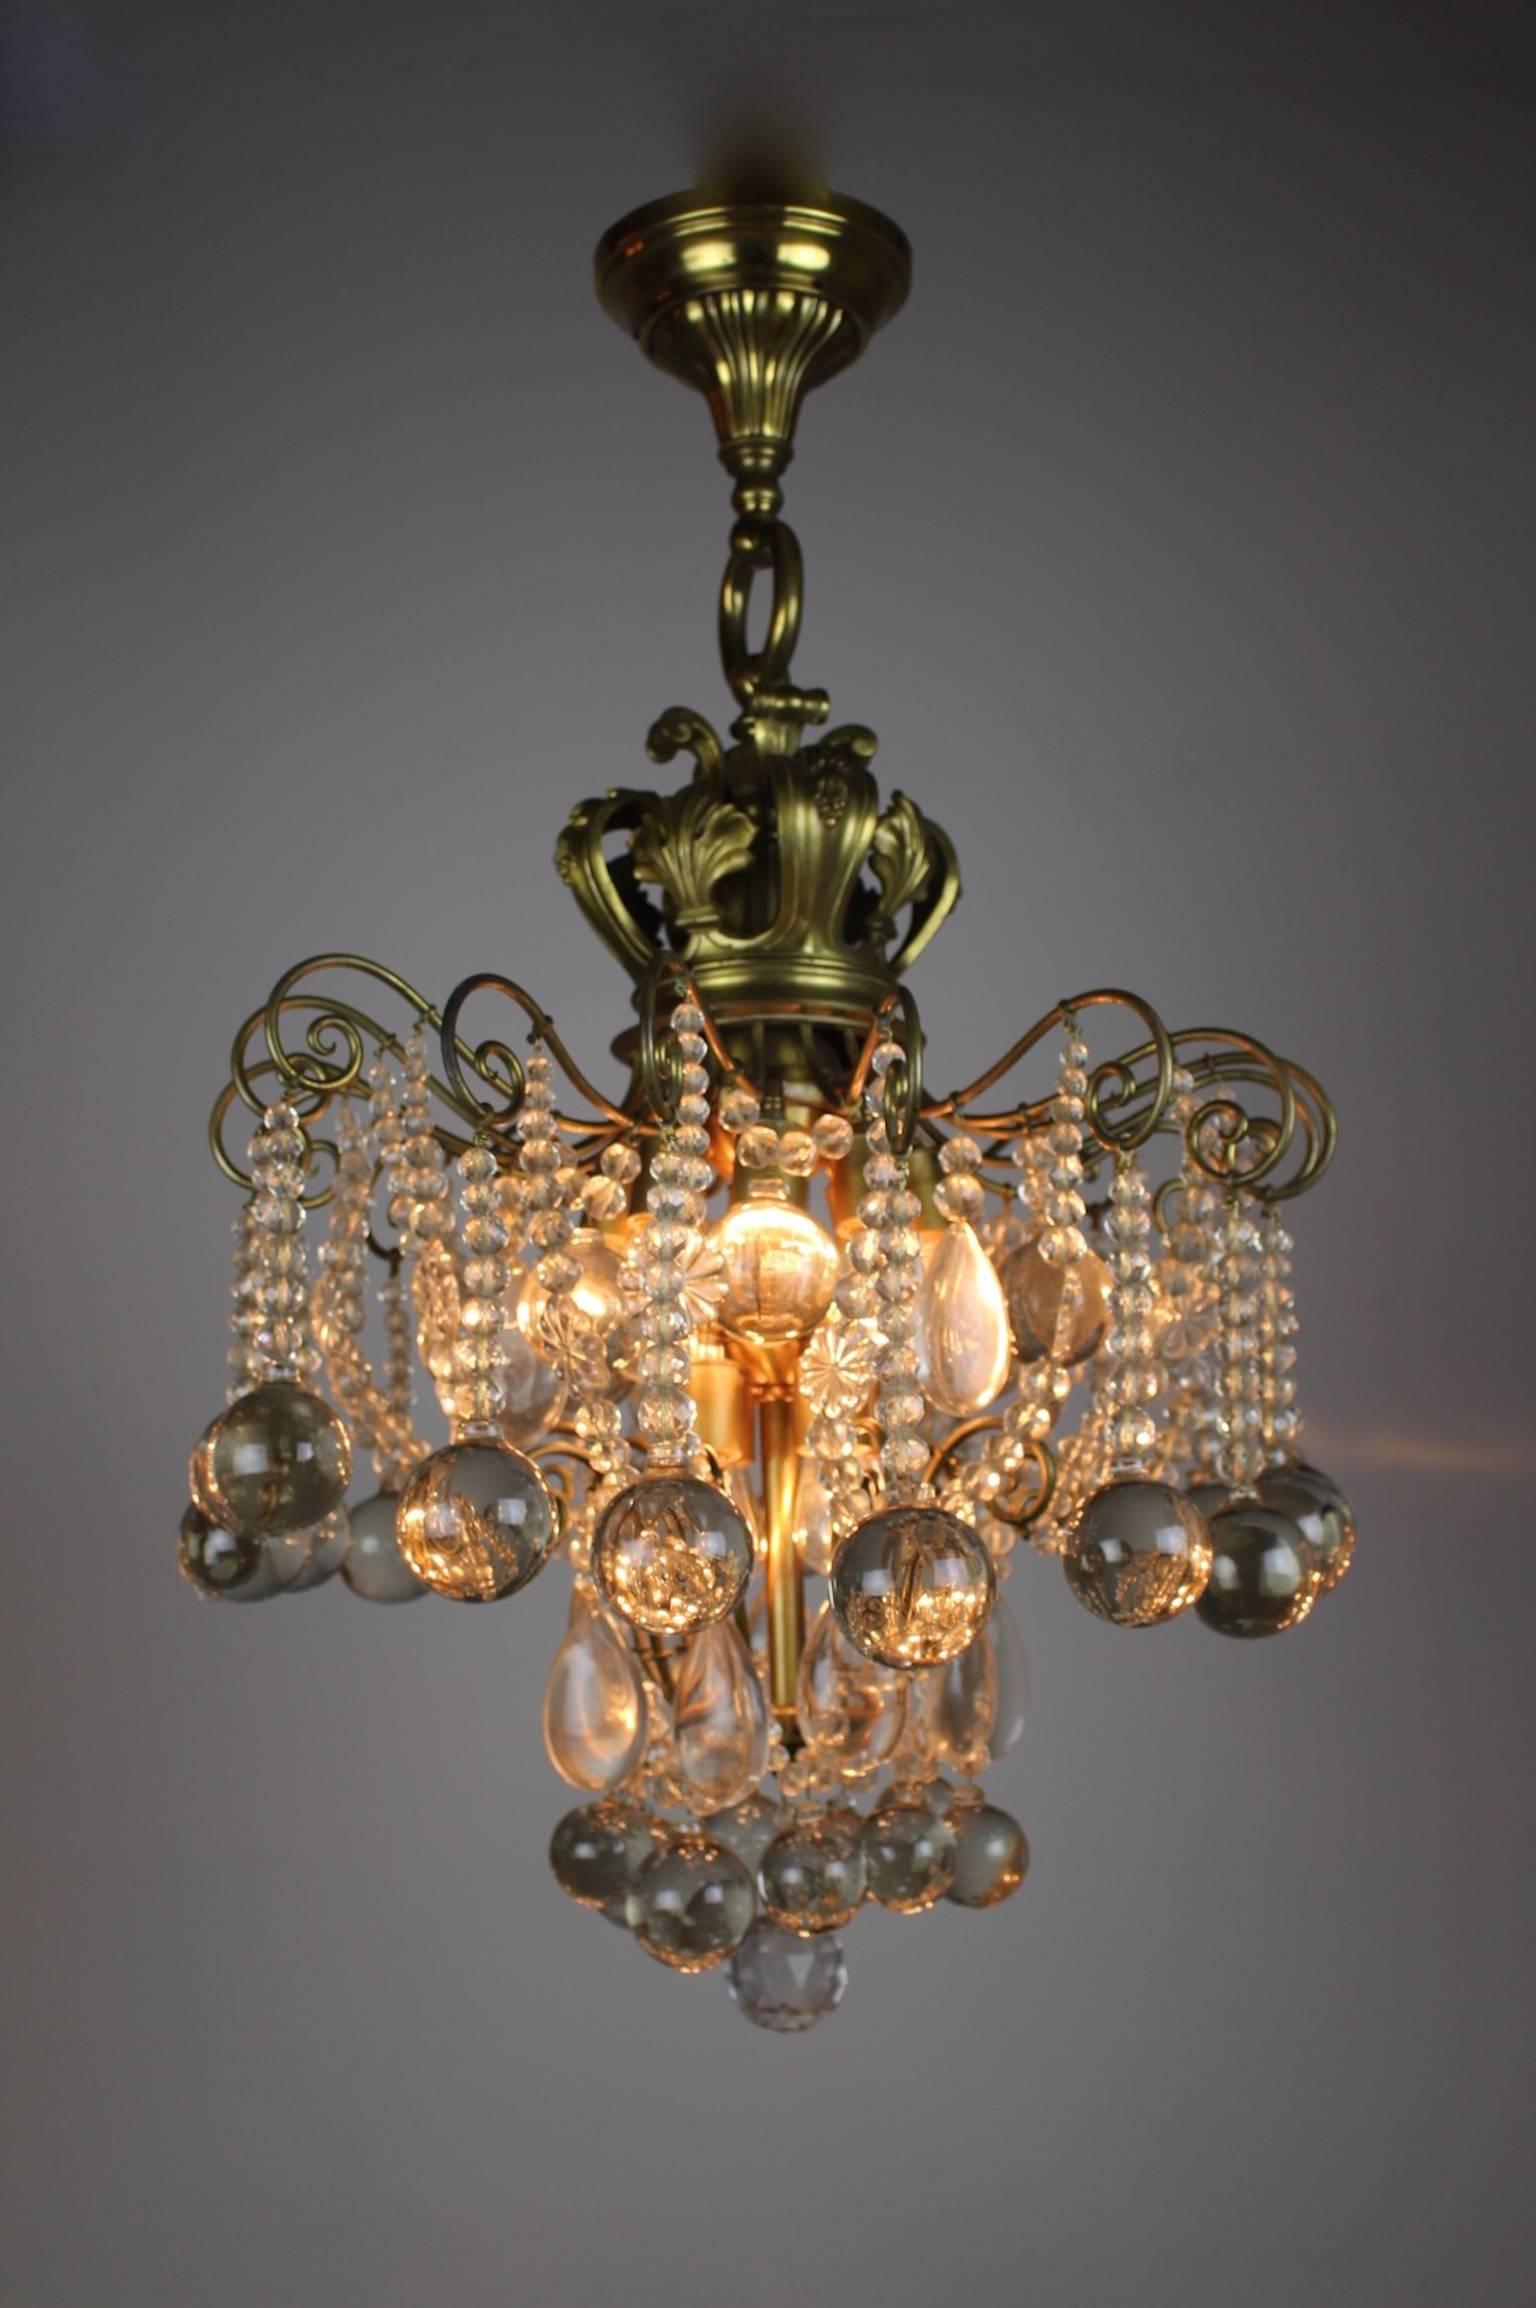 This is a stunning crystal chandelier fixture by E. F. Caldwell of New York City, circa 1910. Fully restored and in excellent condition, this light was originally installed in British Columbia Parliament building in Victoria, Canada in 1910.